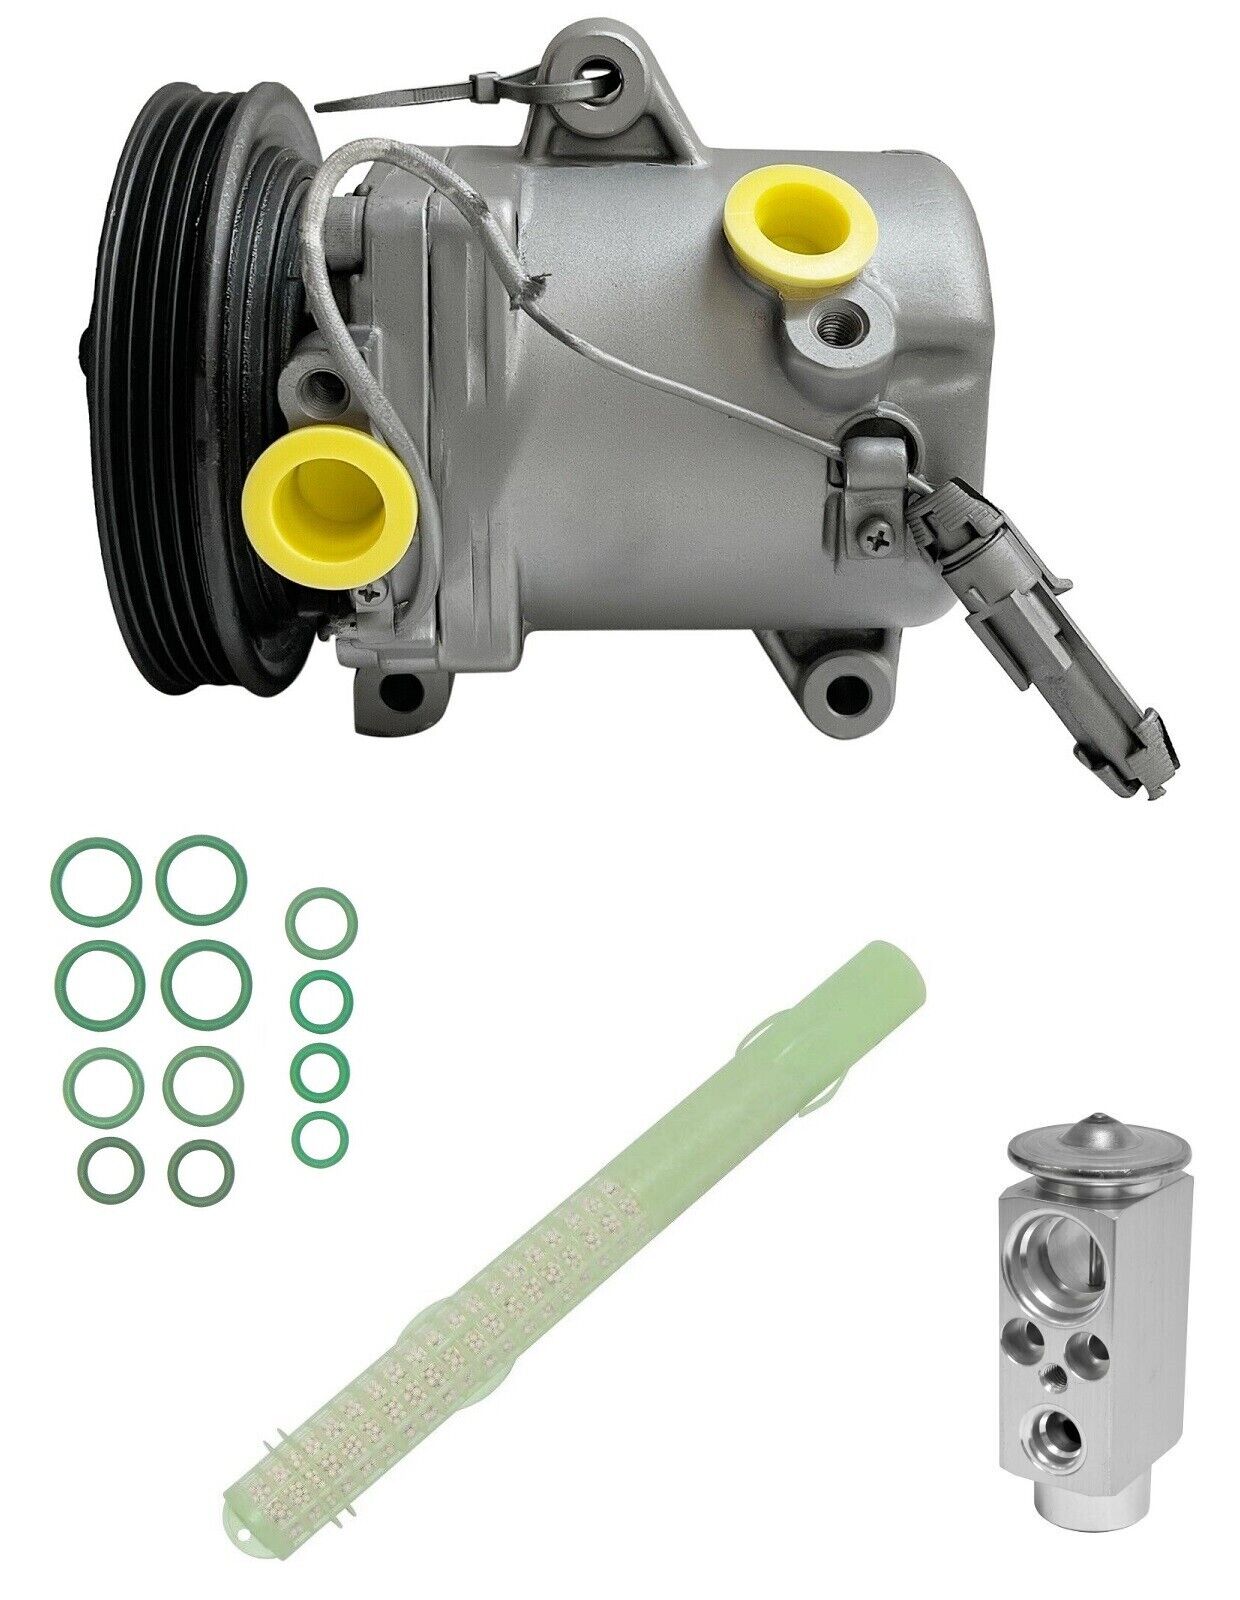 RYC Remanufactured AC Compressor Kit FG401 Fits Smart Fortwo 1.0L 2008